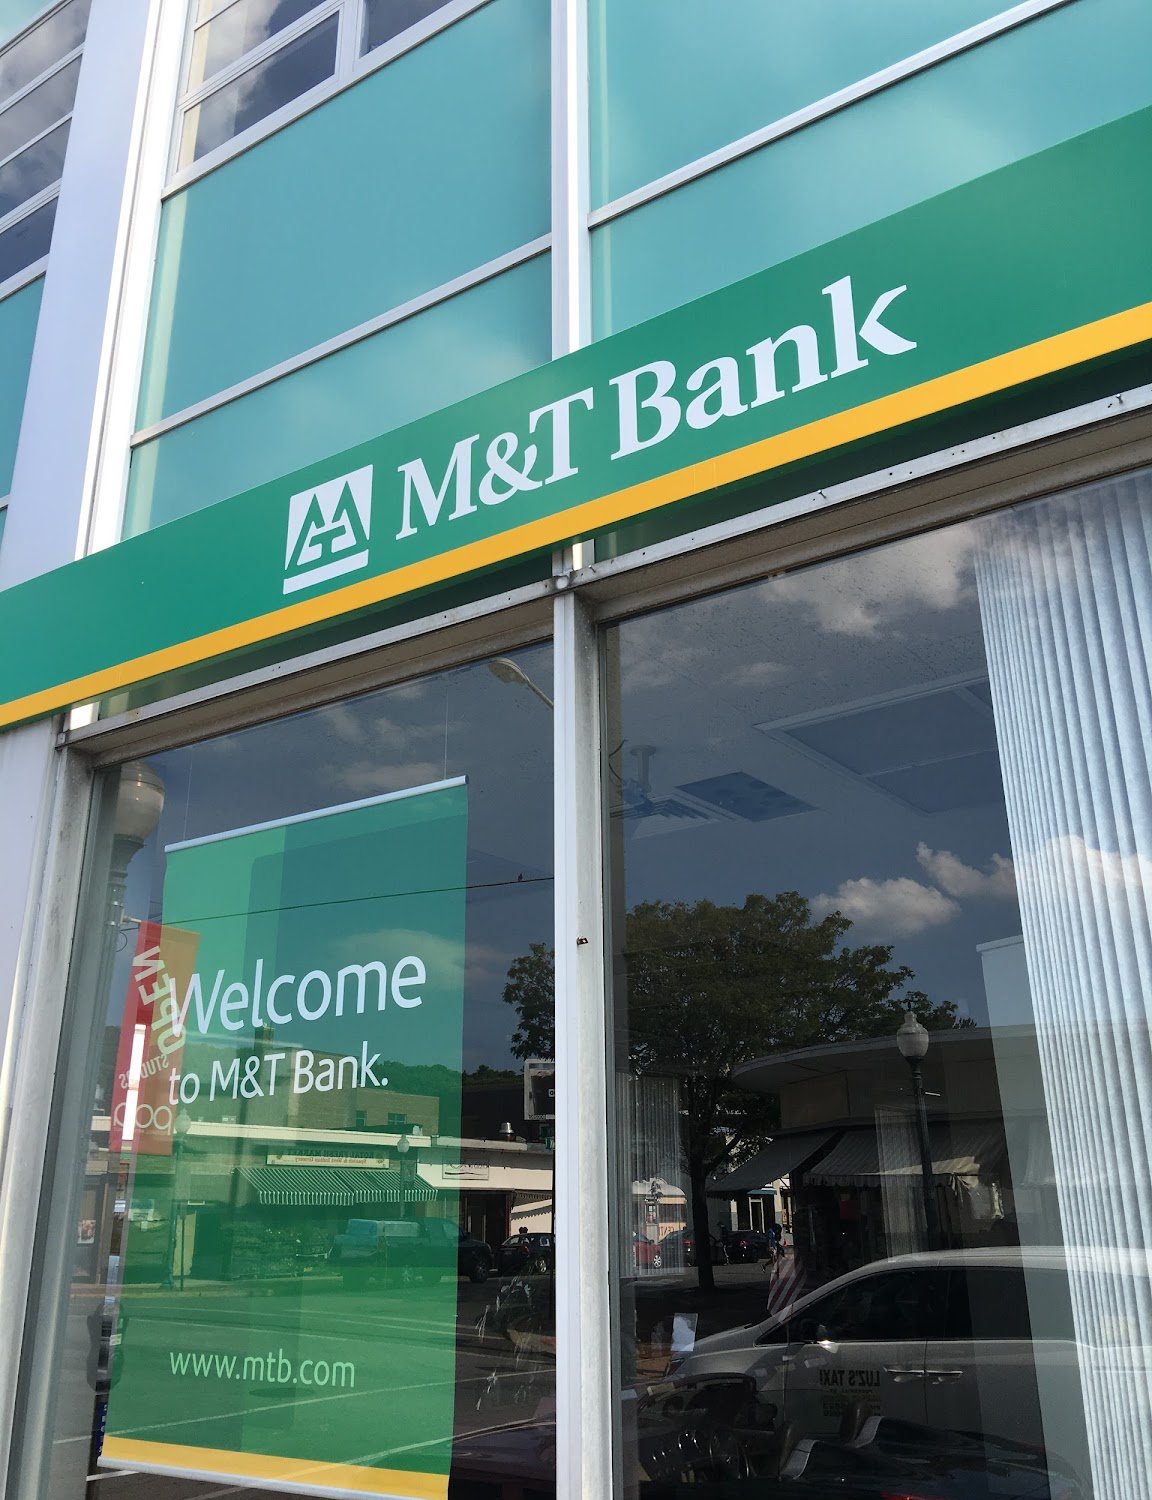 T me bank leads. T/T банк. T Bank. Пикскилл.